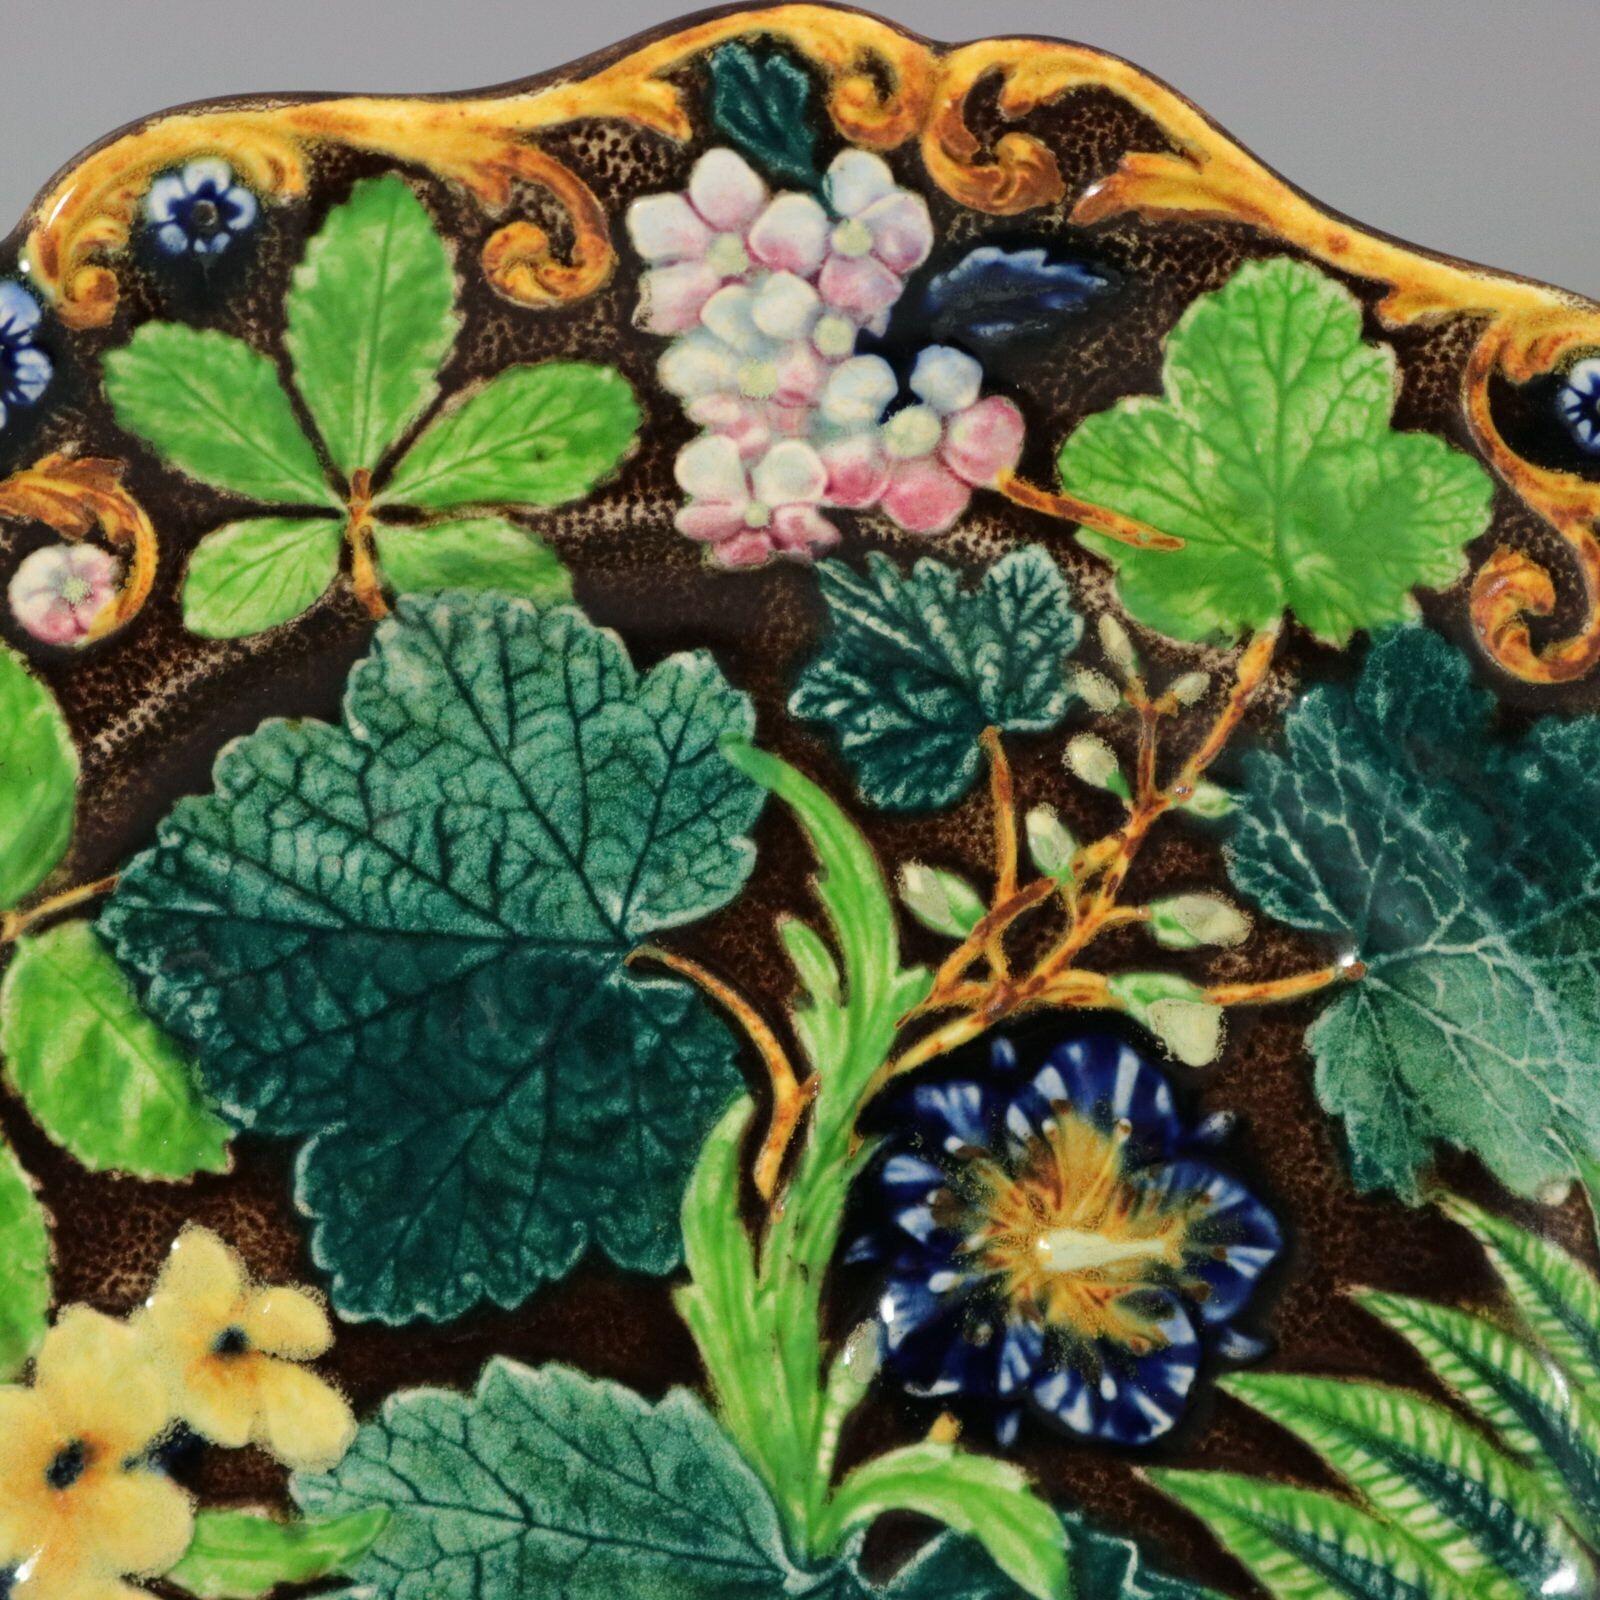 Alcock Majolica plate which features a stunning array of flowers and leaves. Colouration: brown, green, blue, are predominant.